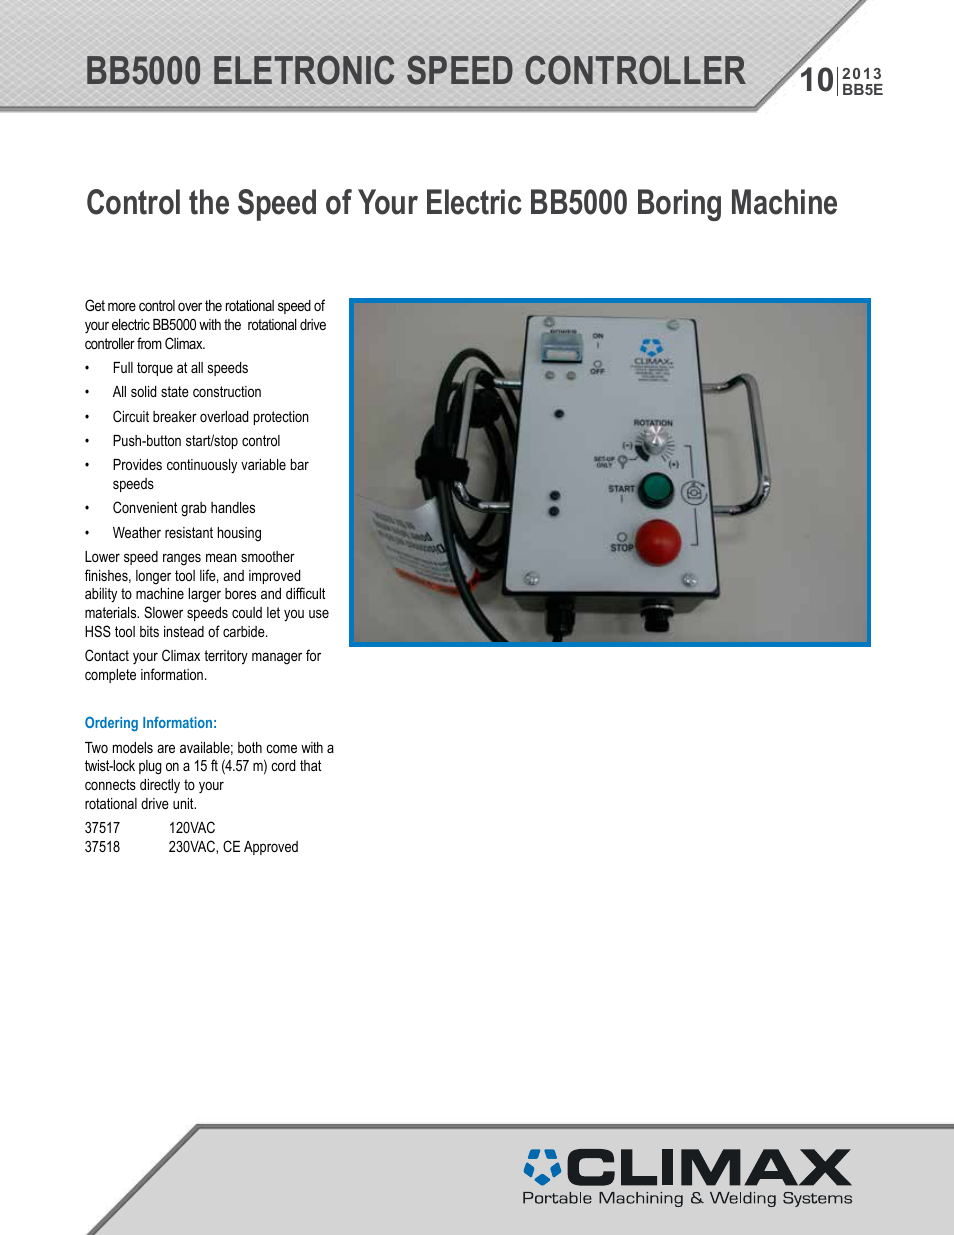 BB5000 Electronic Speed Controller